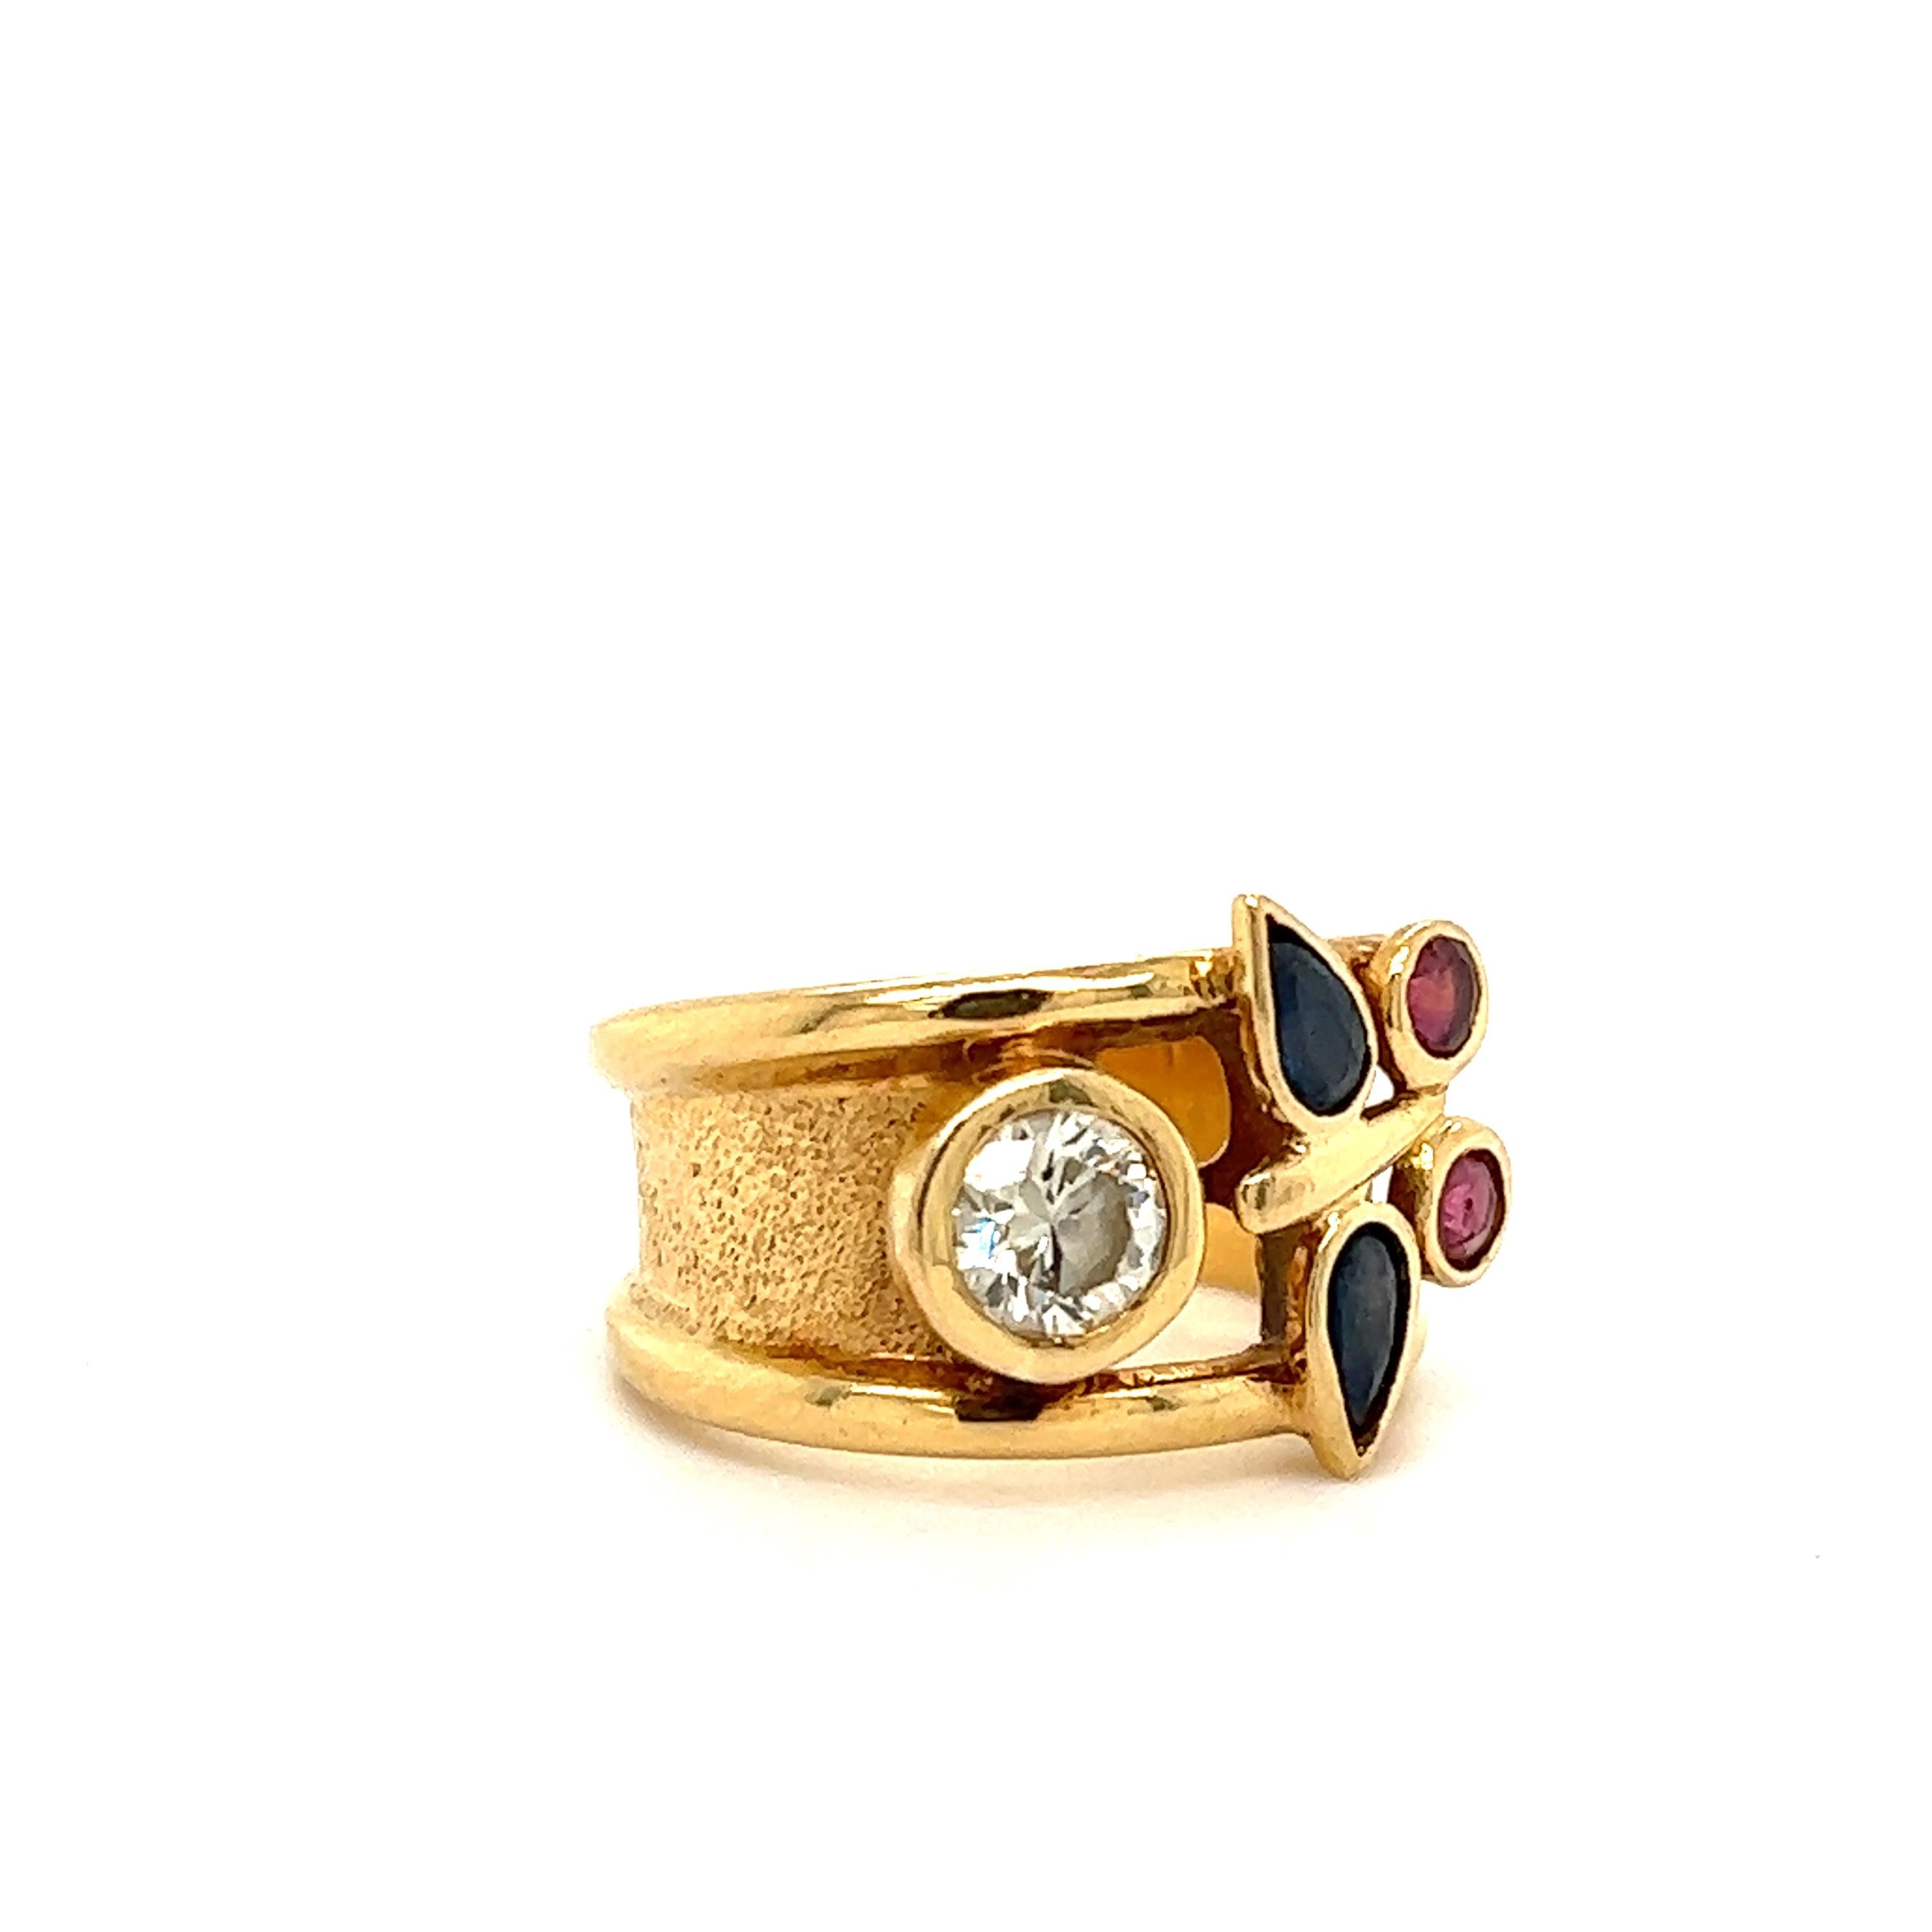 Fantastic design seen on this retro wide band design. The ring is crafted in 18k yellow gold and set with natural earth mined diamonds, rubies and sapphires. The ring is set with one approximate 1.00 ct. round brilliant cut diamond that is bezel